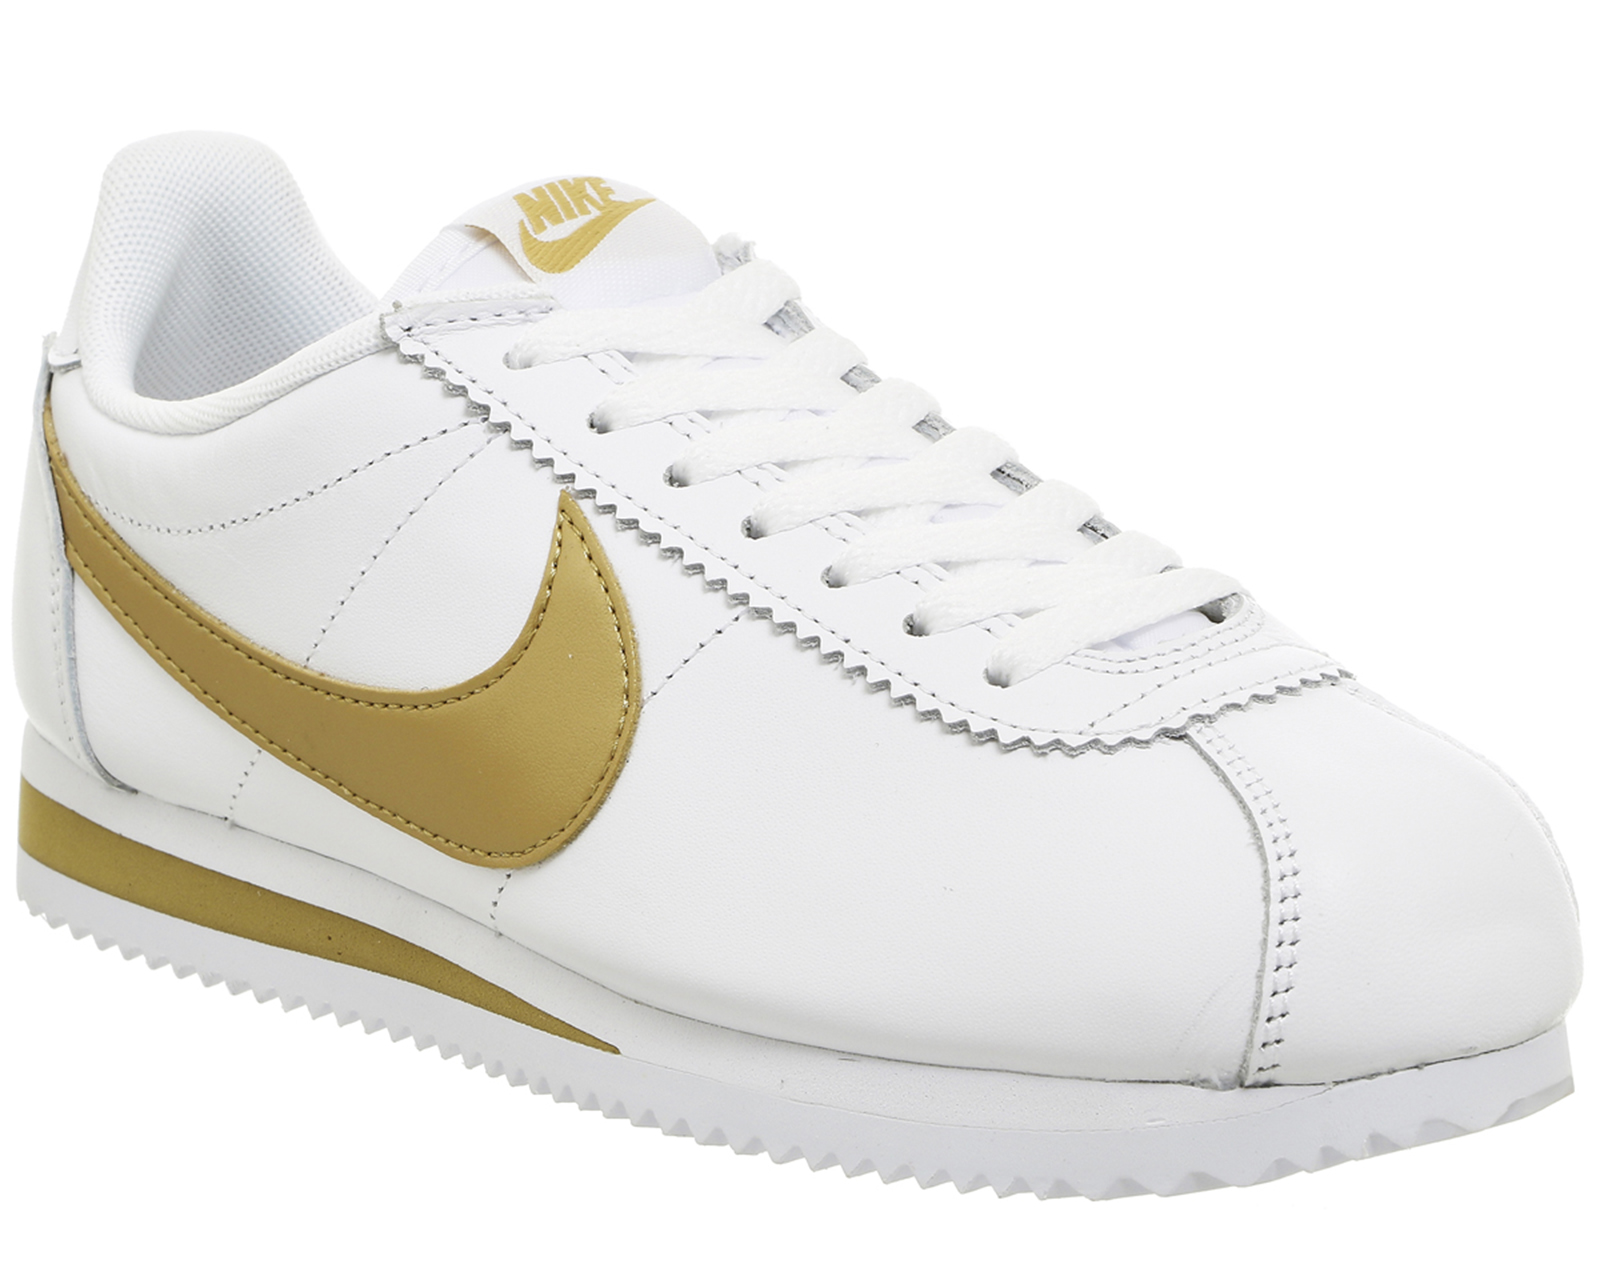 Nike Classic Cortez OG Trainers White Metallic Gold - Hers trainers